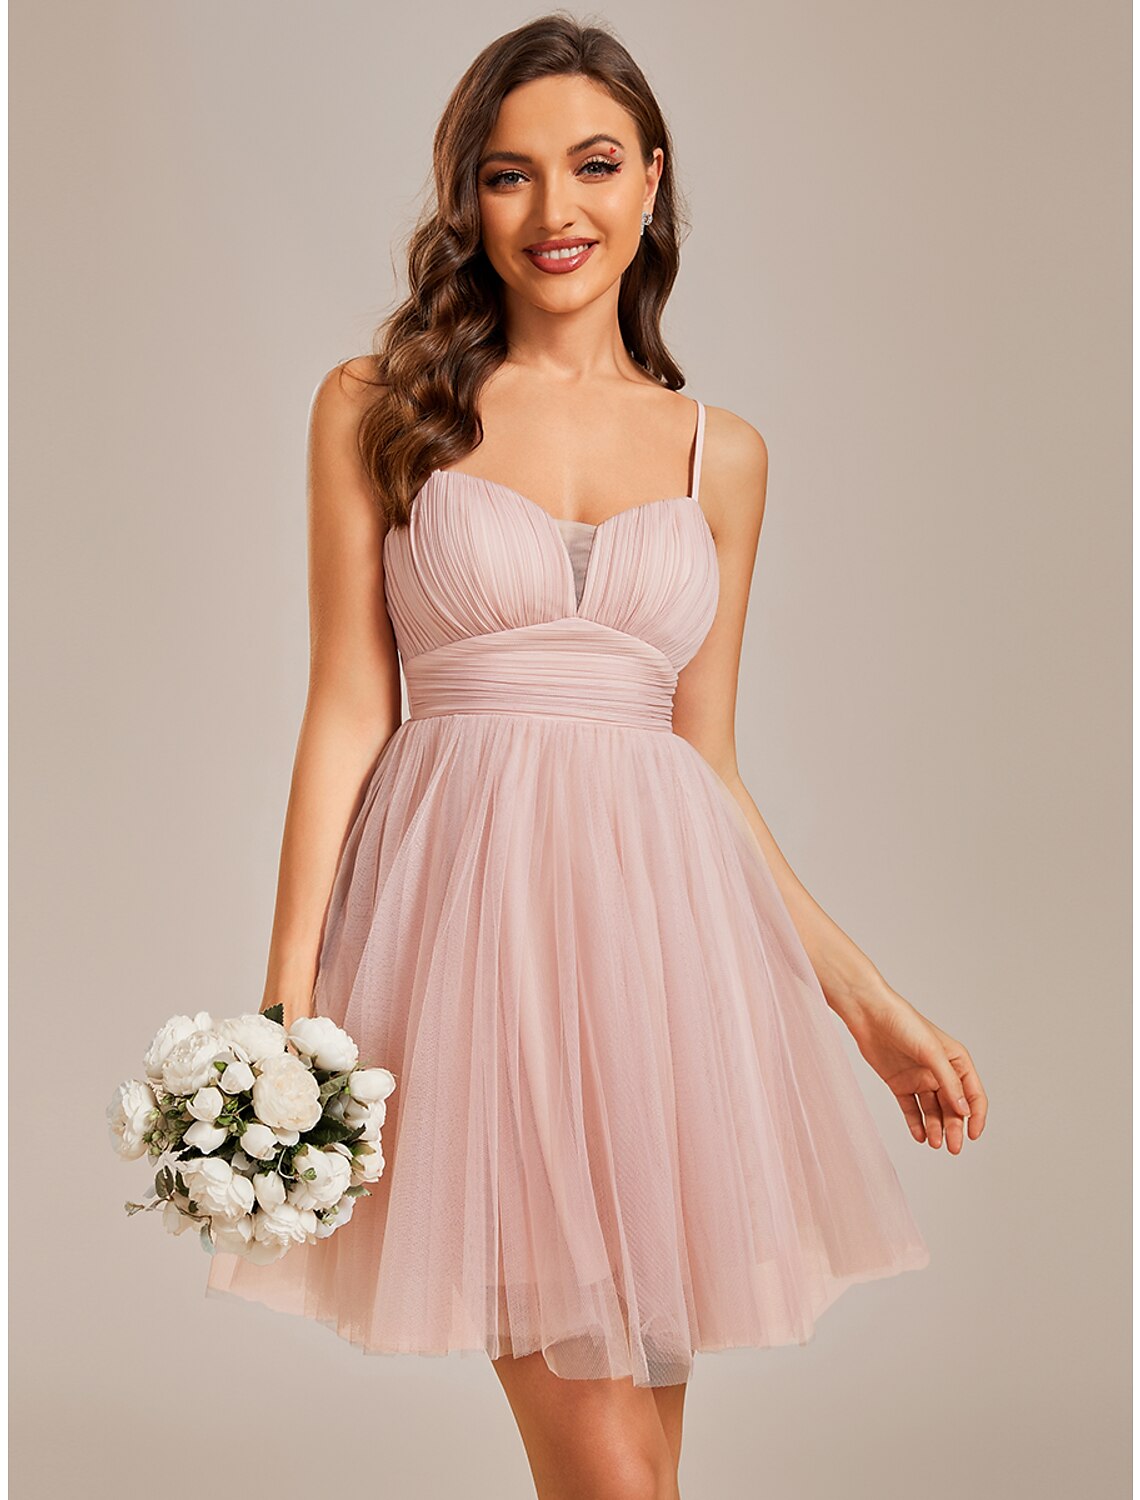 A-Line Homecoming Dresses Princess Dress Cocktail Party Short / Mini Sleeveless Spaghetti Strap Tulle with Ruched